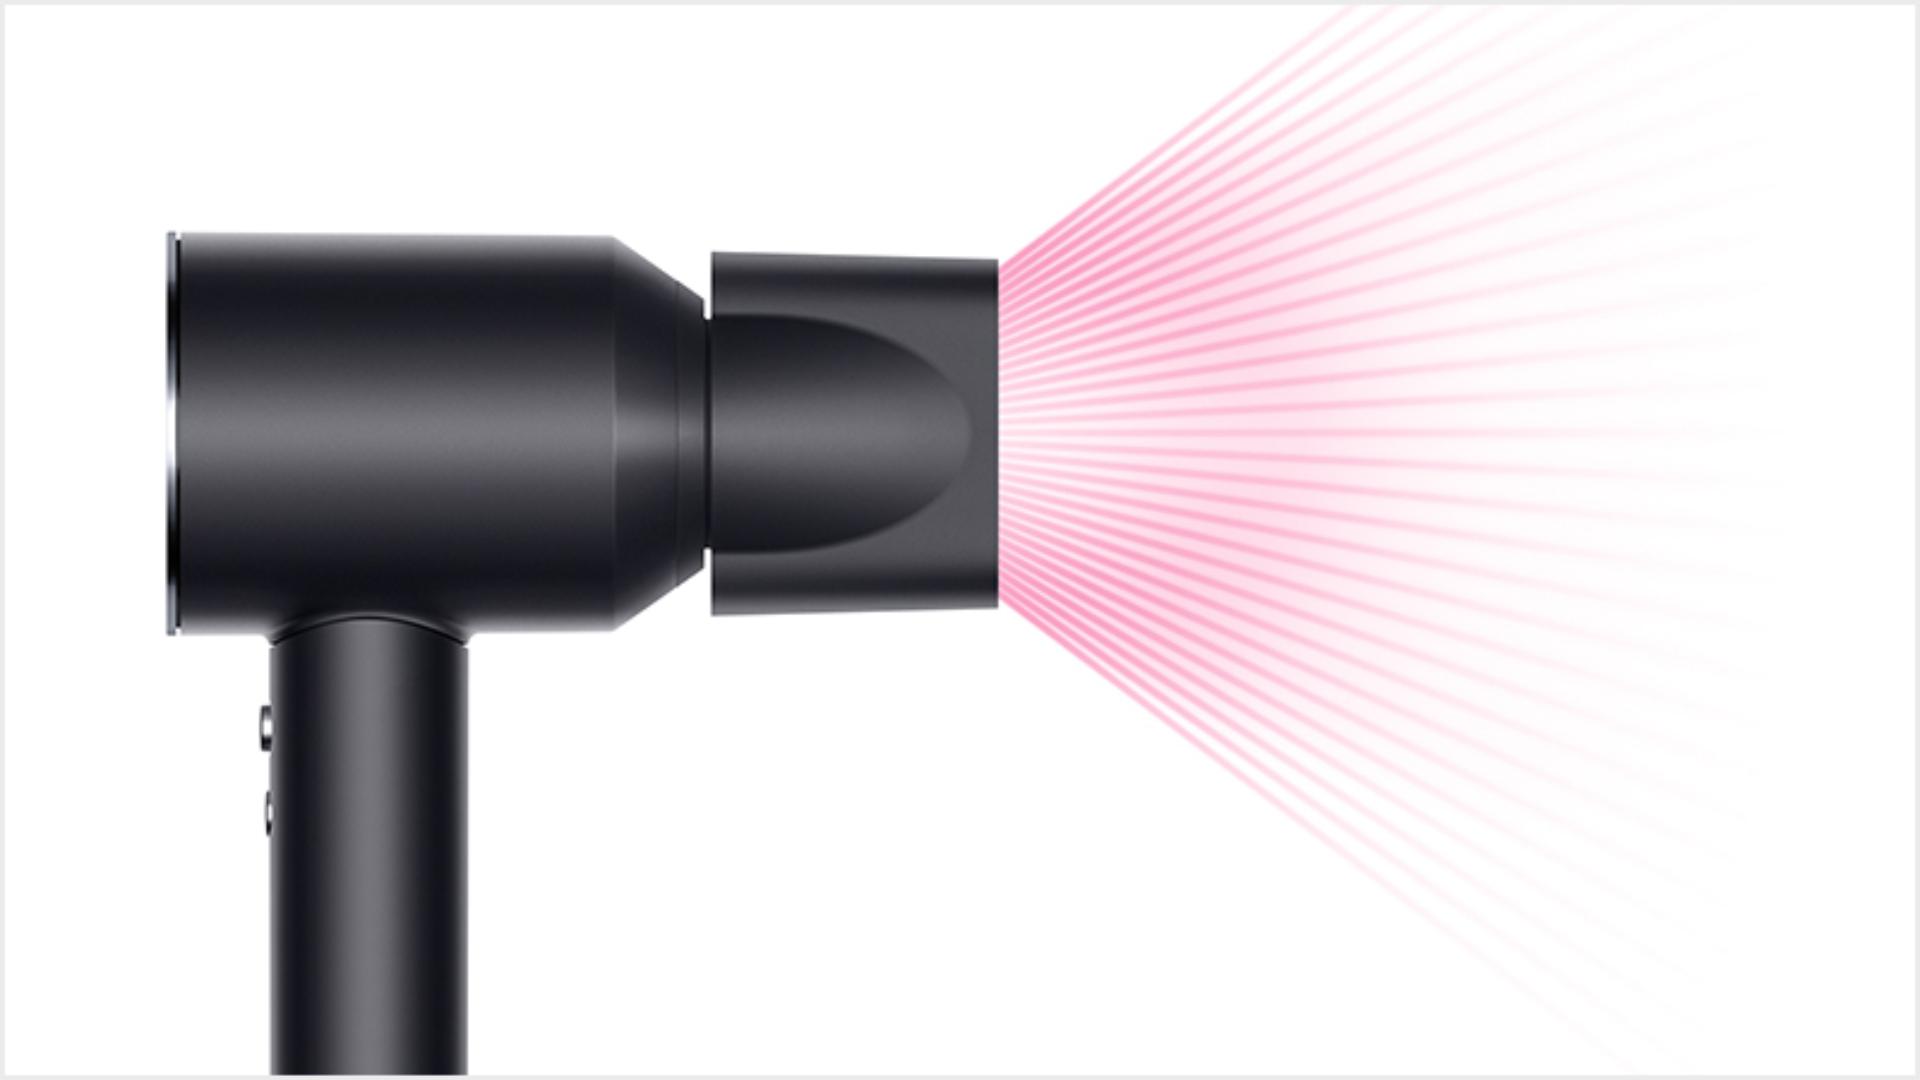 Dyson Supersonic™ hair dryer Black/Nickel with Wide tooth comb attachment